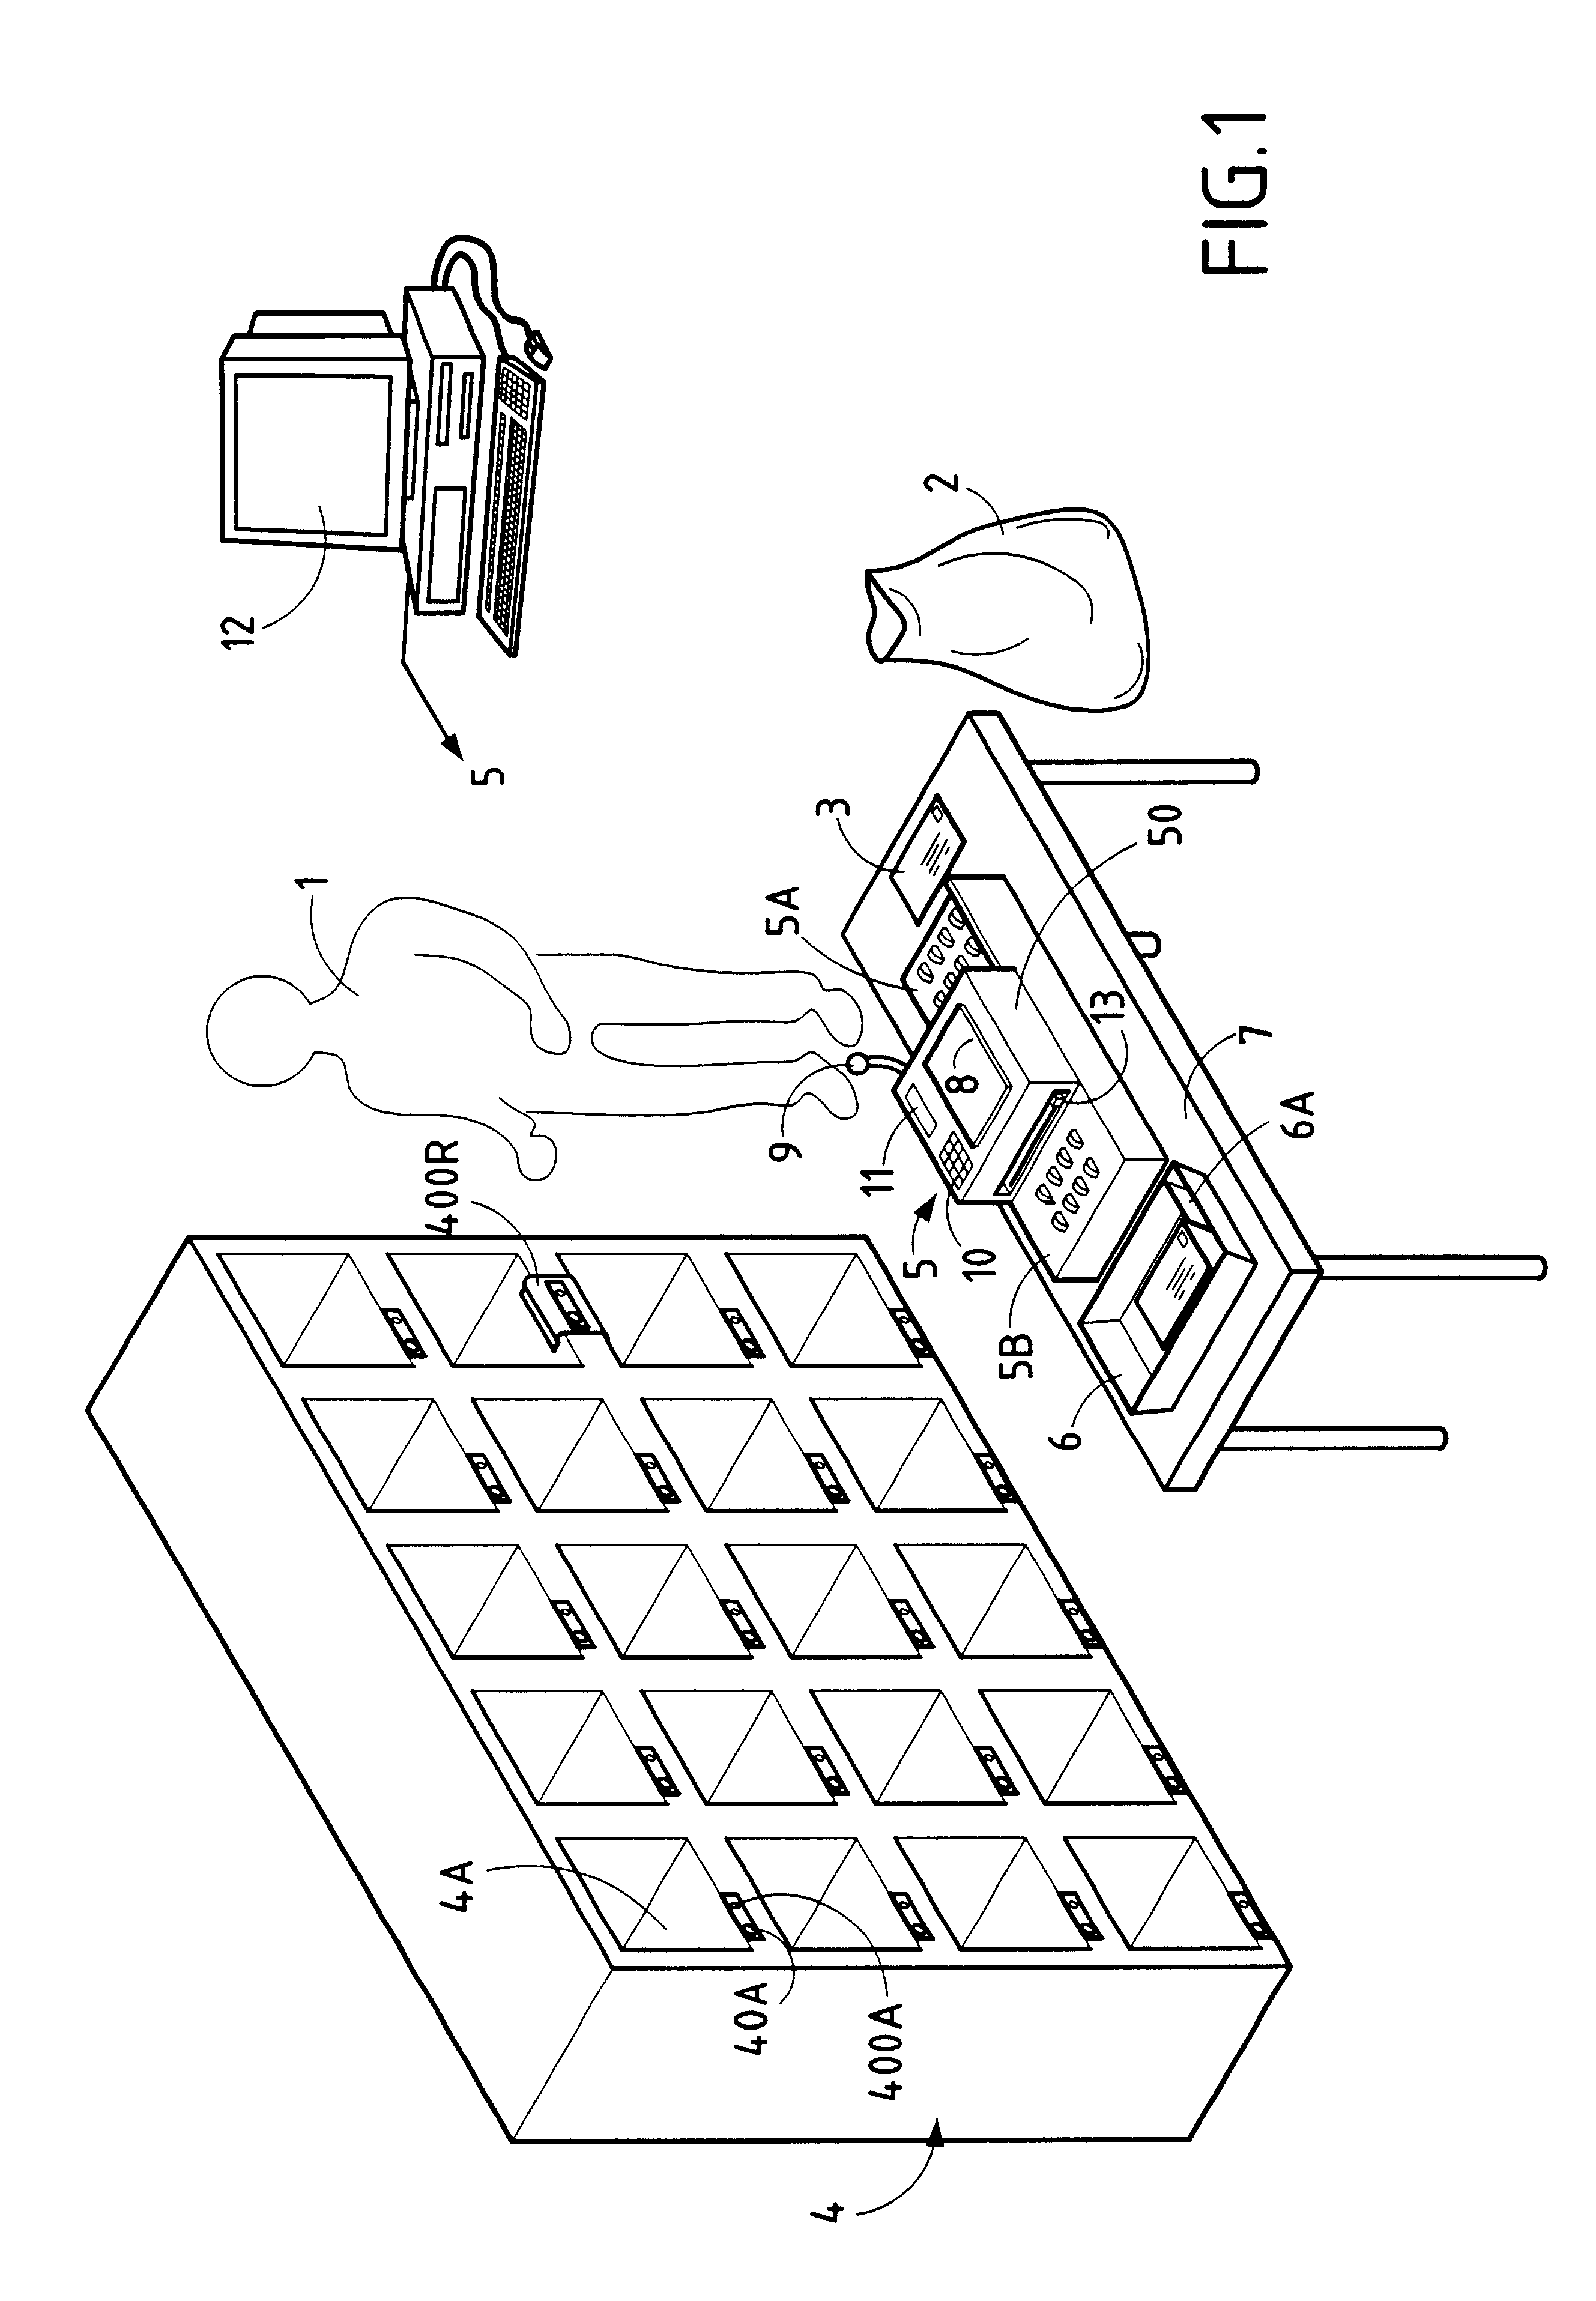 Apparatus for assisting manual sorting of mail articles